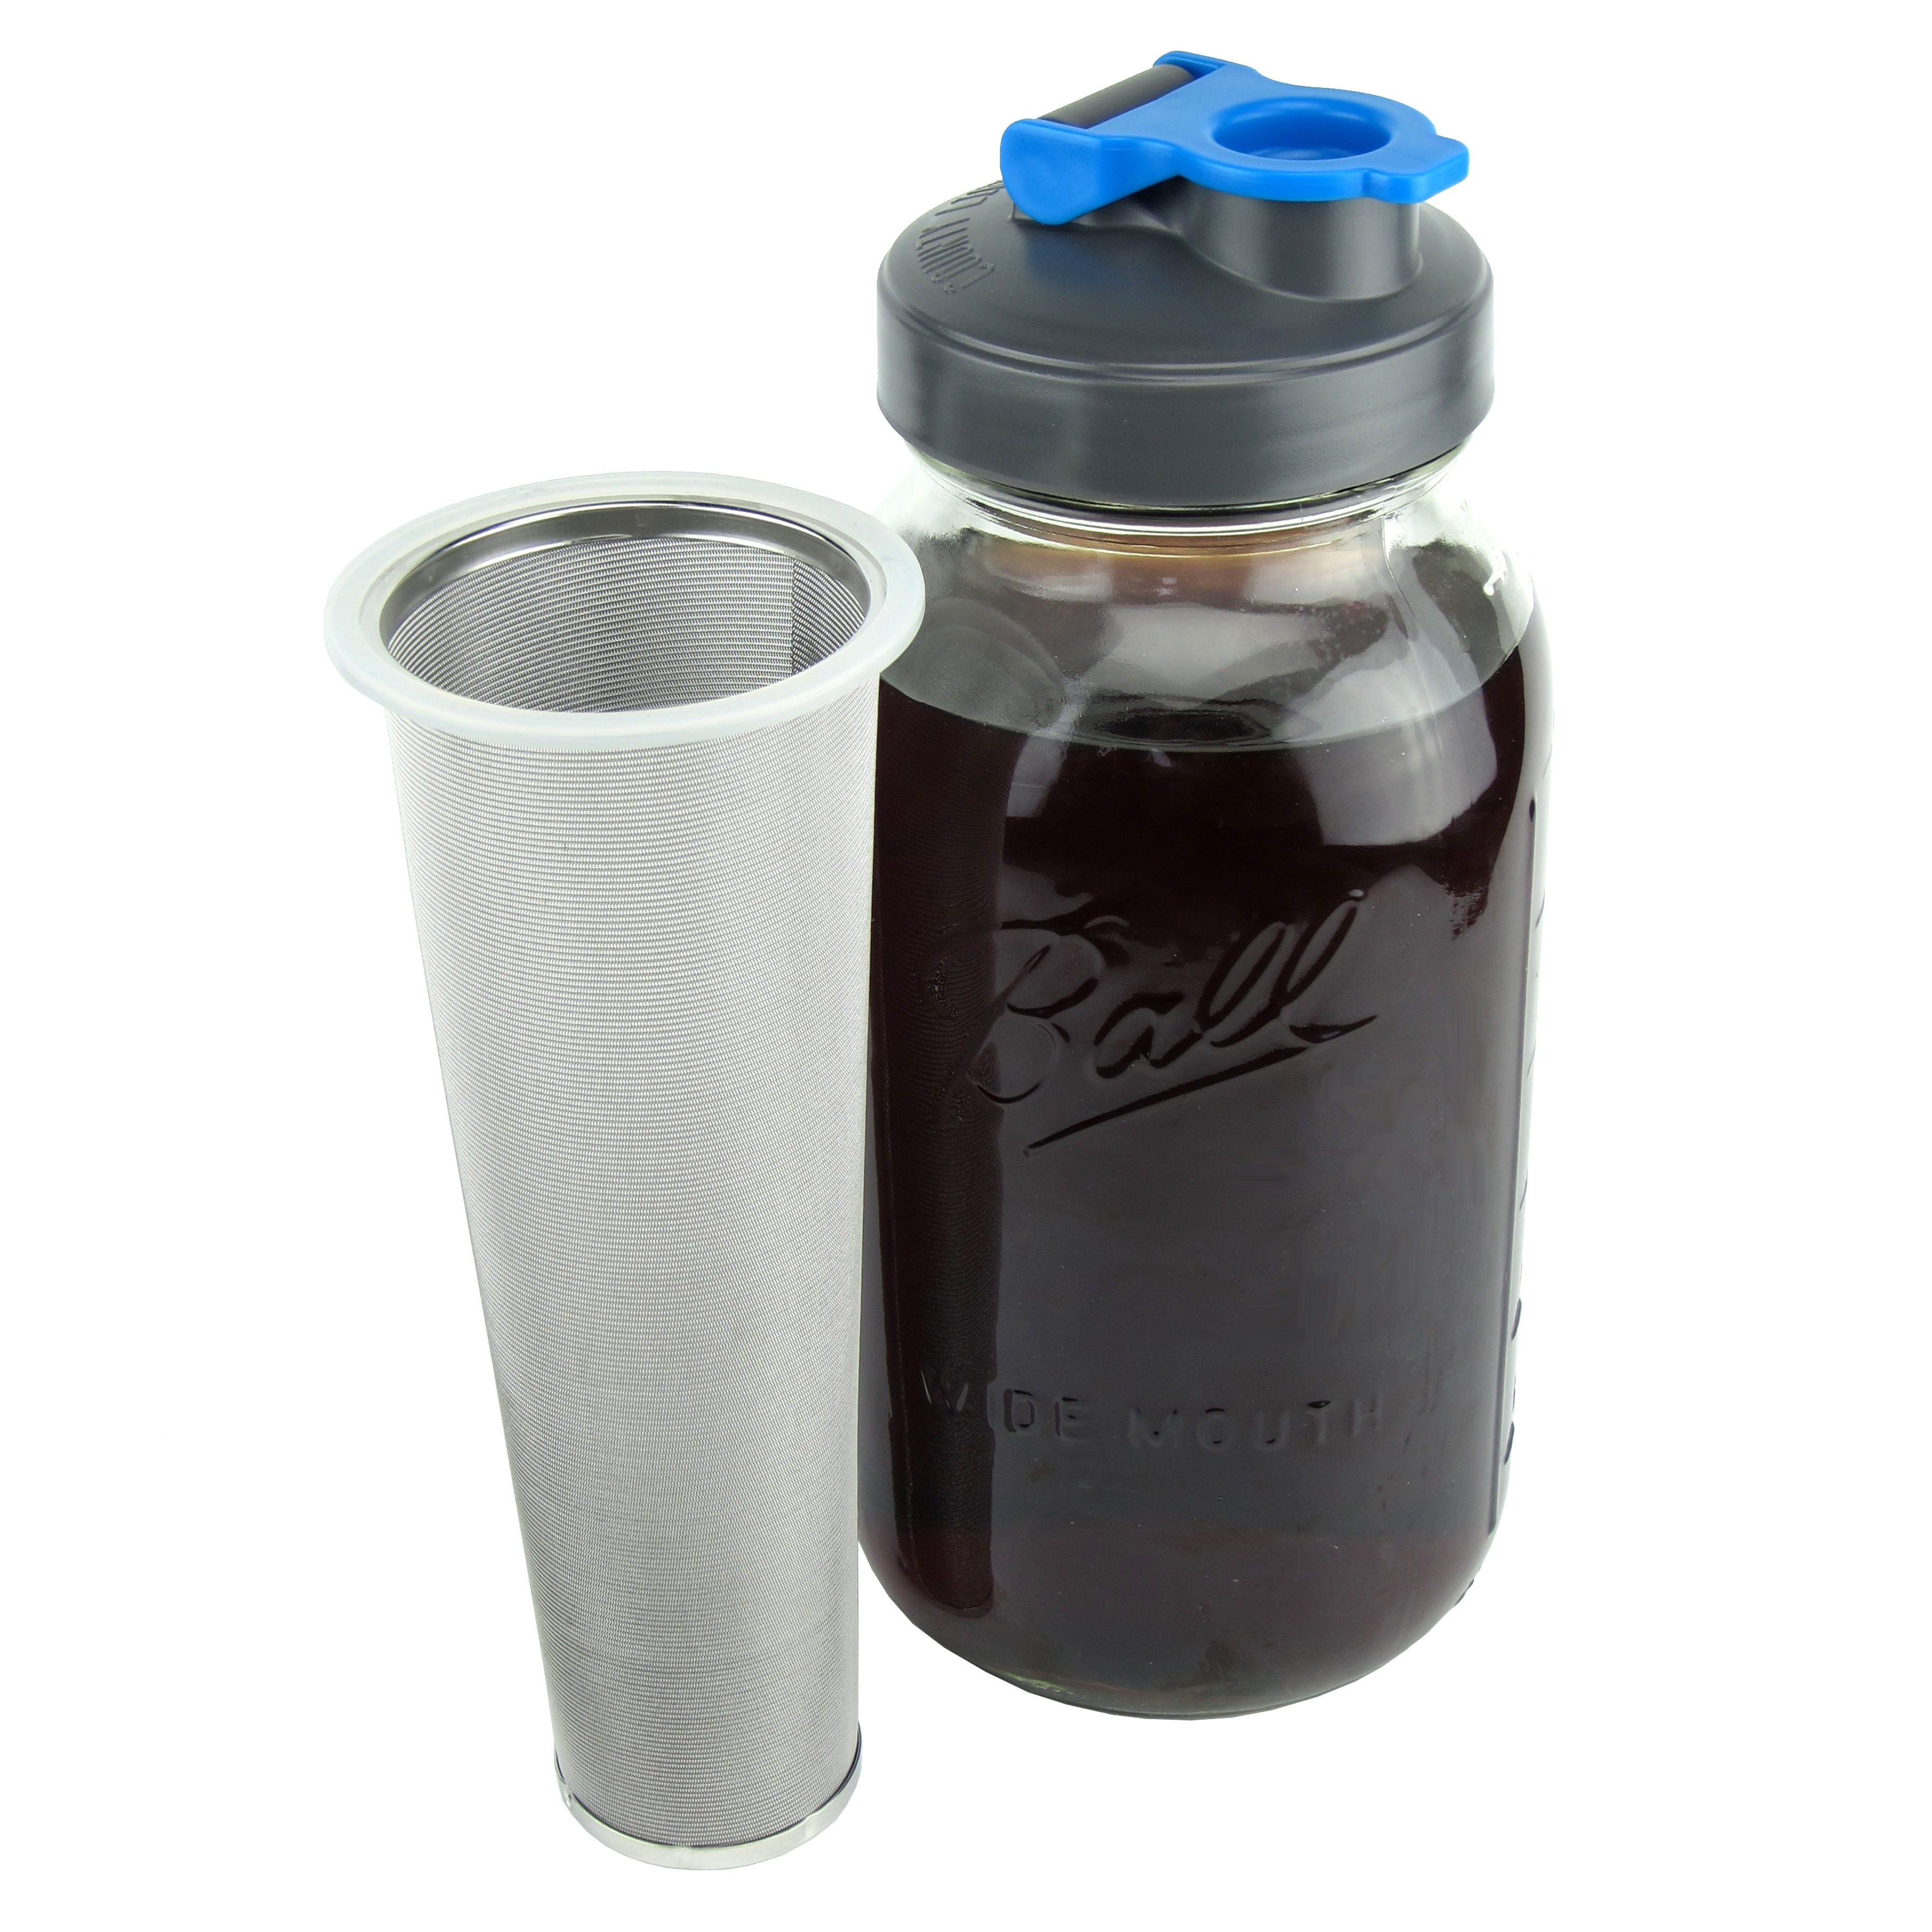  County Line Kitchen - Cold Brew Mason Jar Coffee Maker, Durable  Glass, Heavy Duty Stainless Steel Filter, Lid, and Pour Spout - 4 Quart,  (128 oz / 1 Gallon) : Home & Kitchen